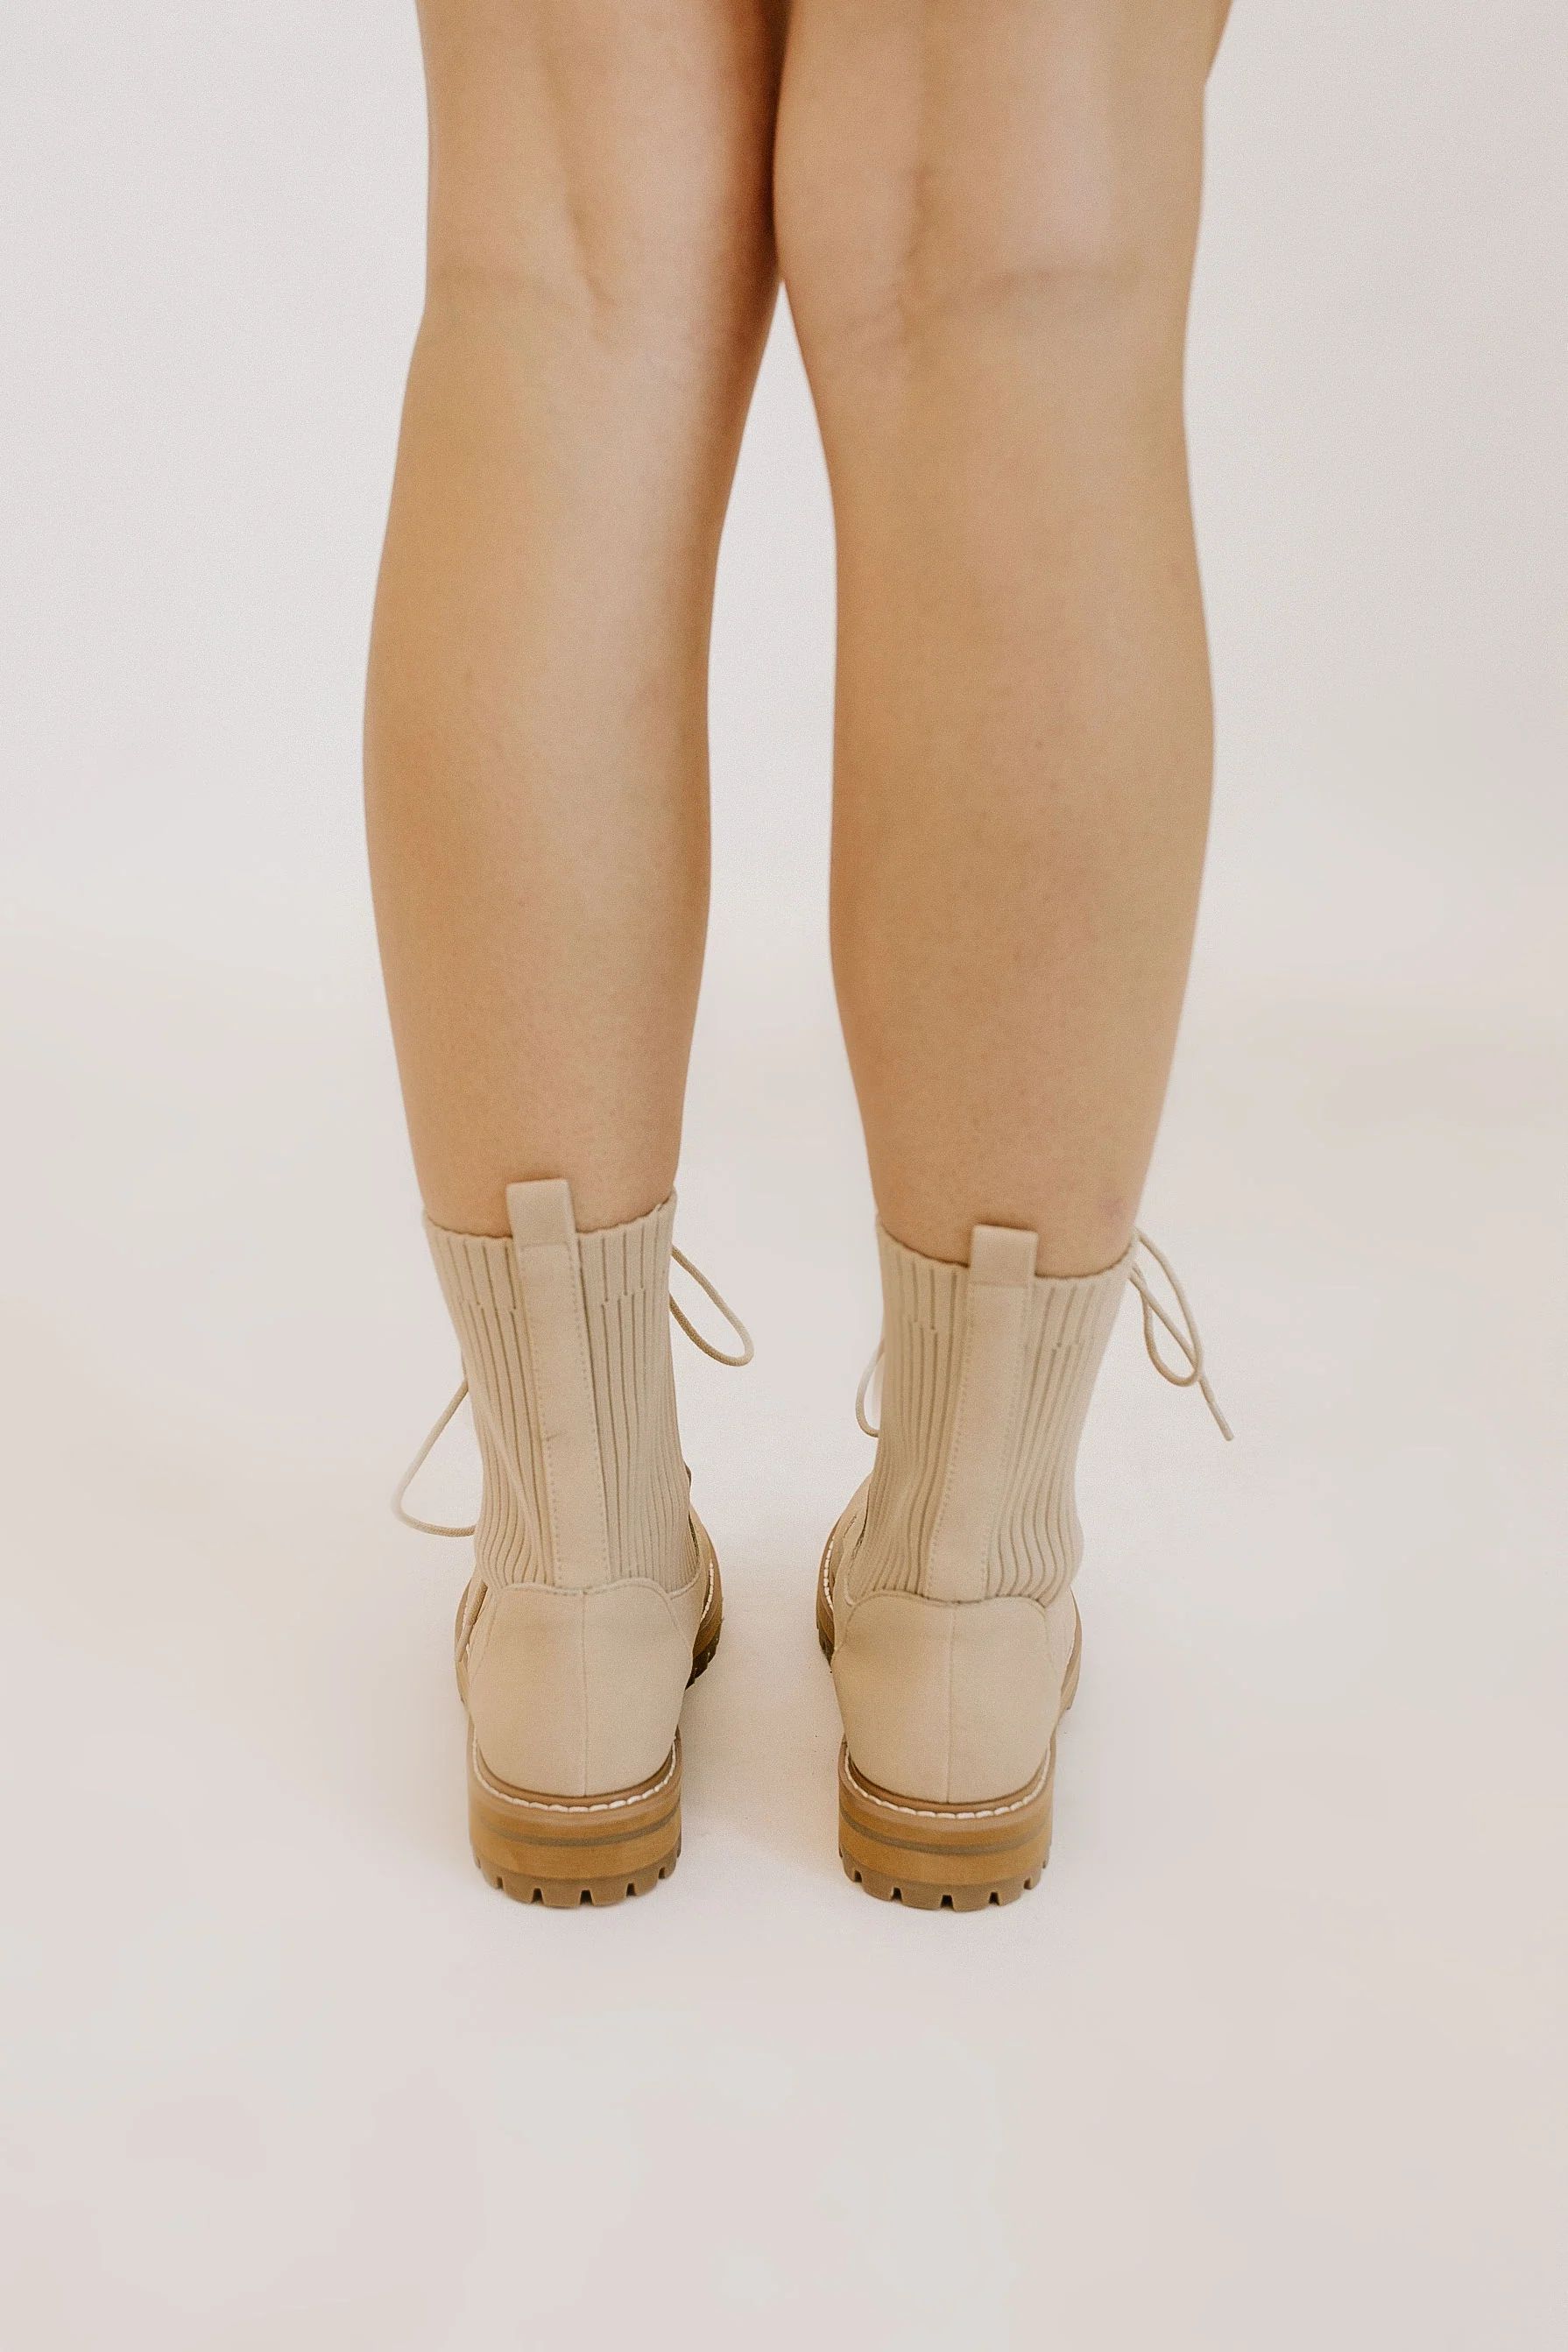 Take Care Bootie - Beige | THELIFESTYLEDCO